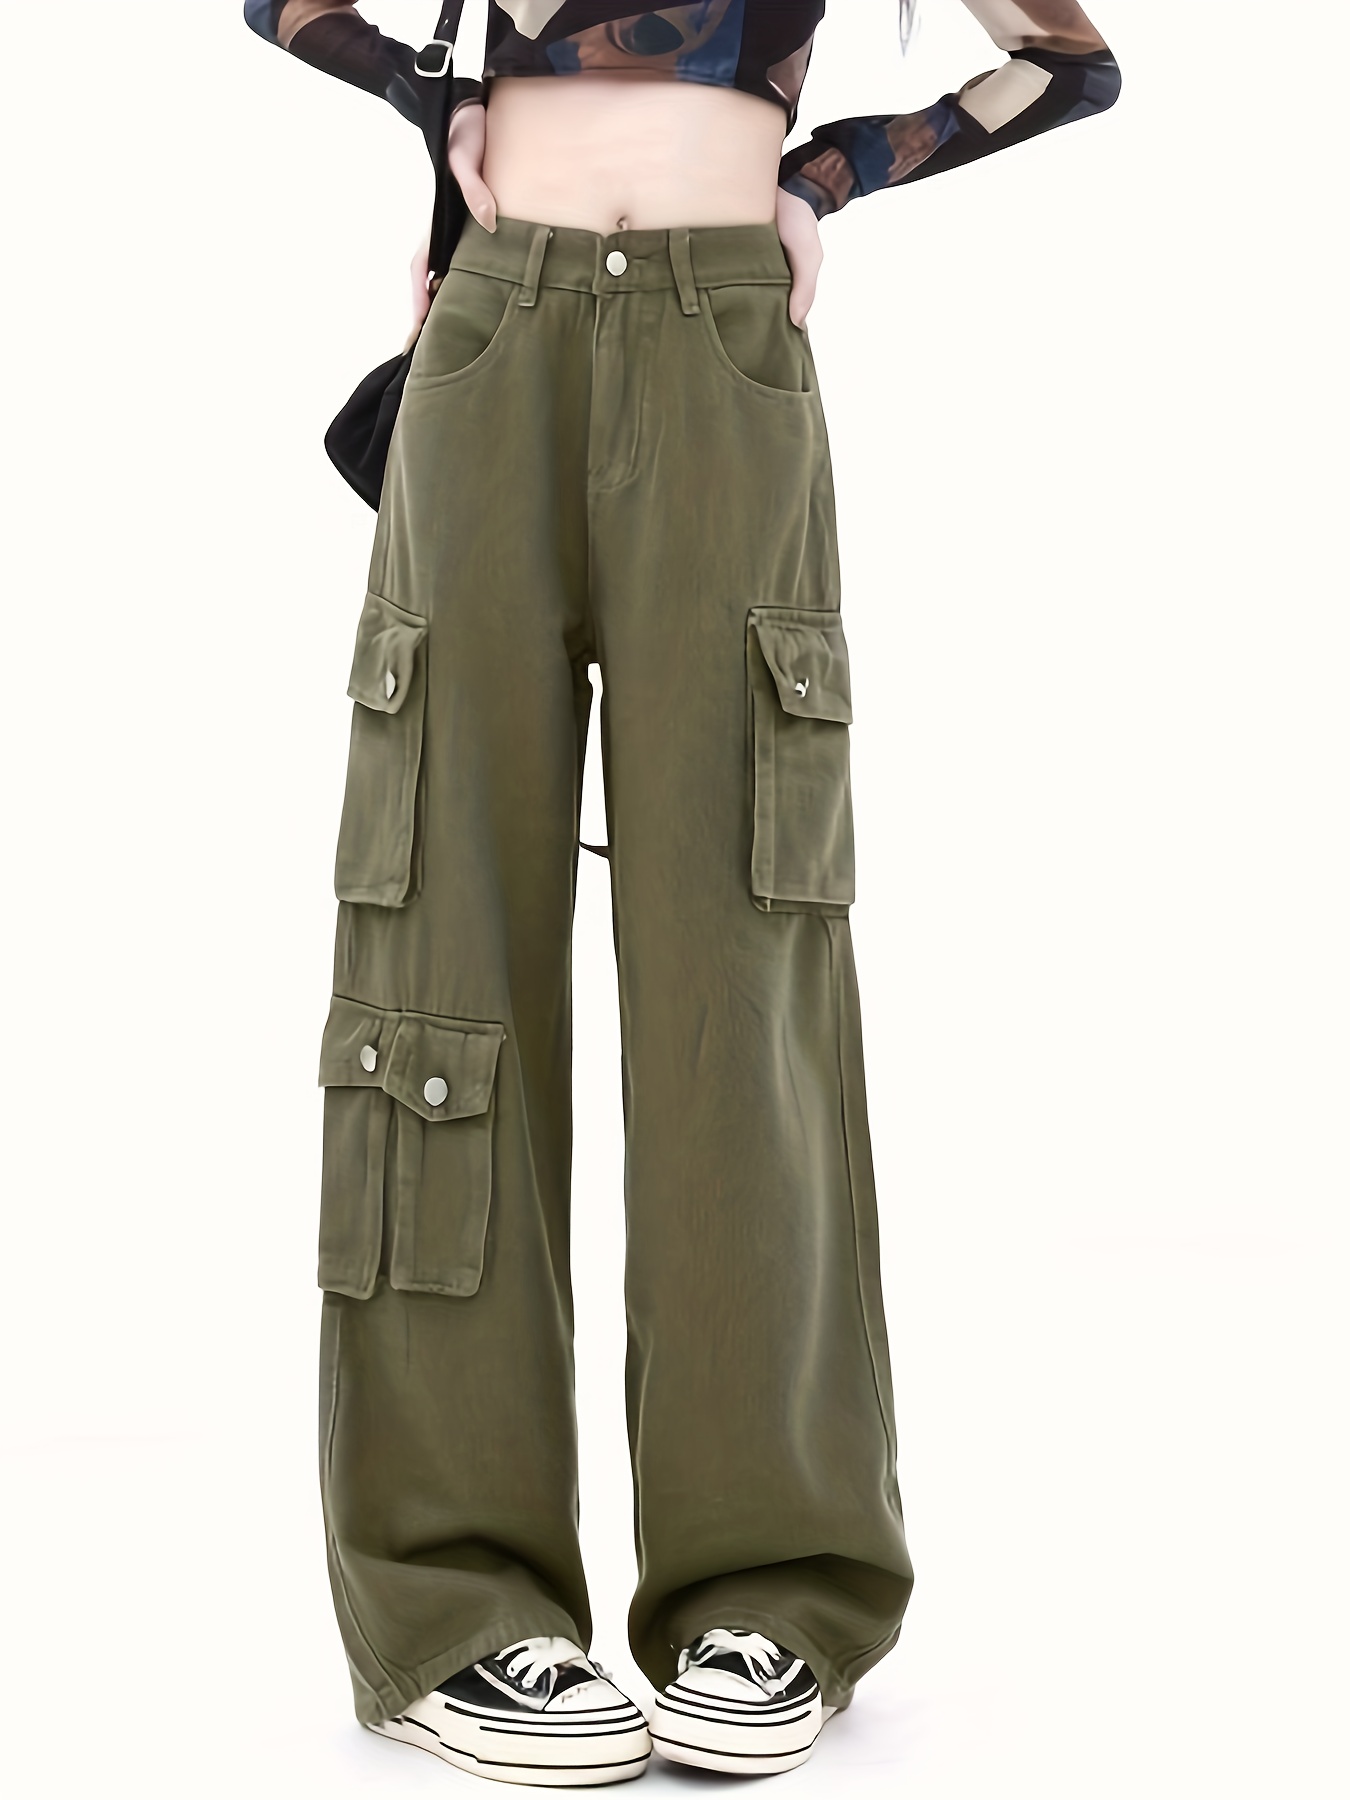  Women's Jeans Flap Pocket Cargo Jeans Jeans for Women (Color :  Army Green, Size : W30 L32) : Ropa, Zapatos y Joyería